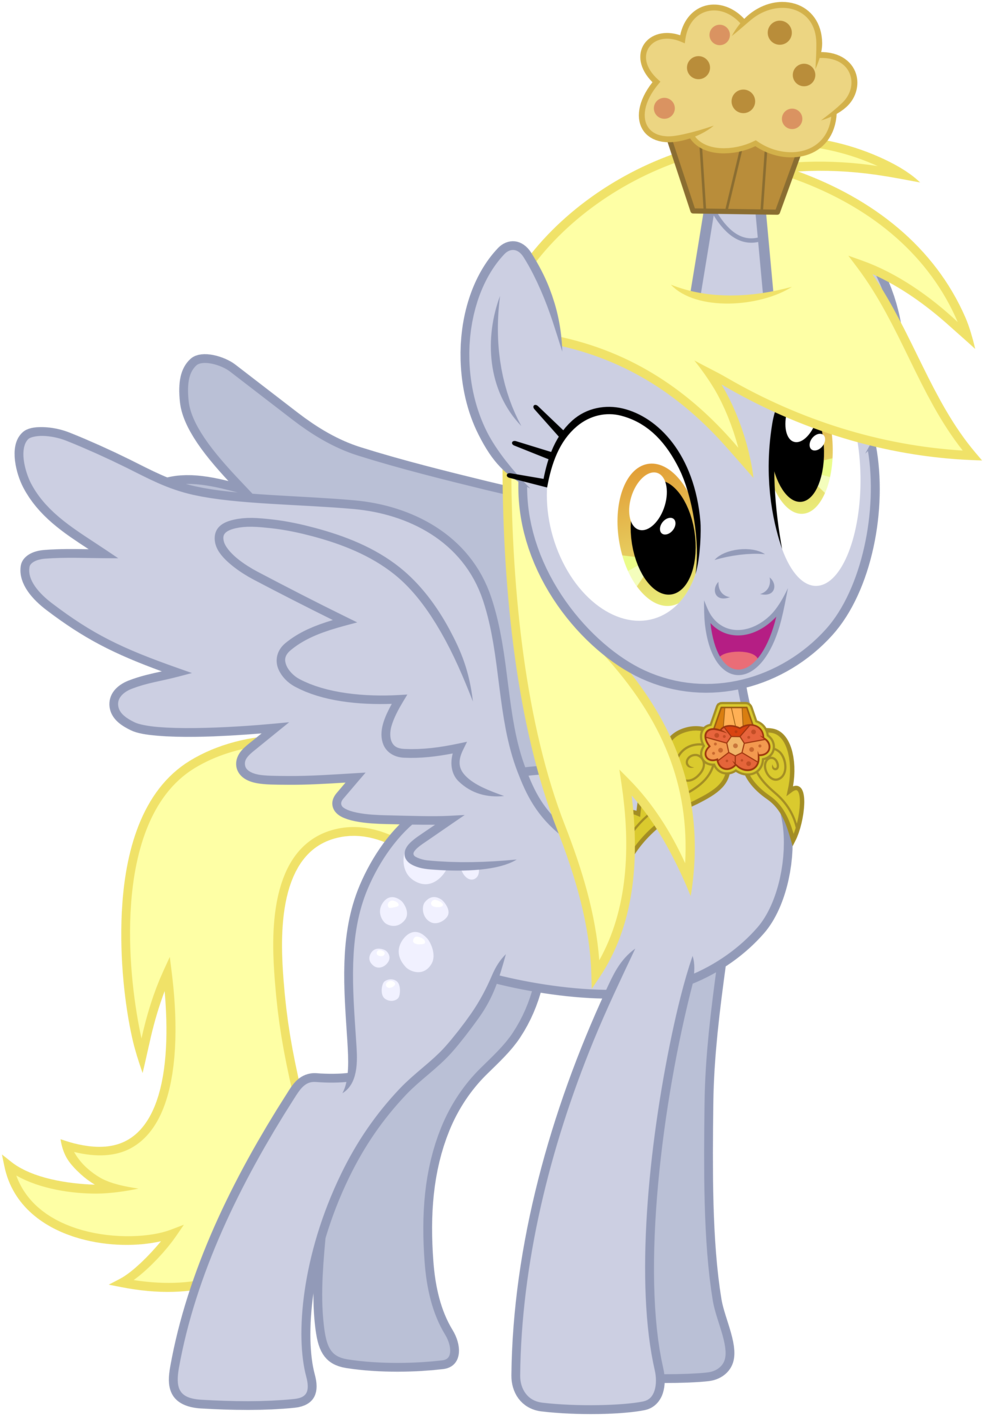 Derpy Hooves Twilight Sparkle Pony Muffin Rarity - My Little Pony Muffins (1024x1456)